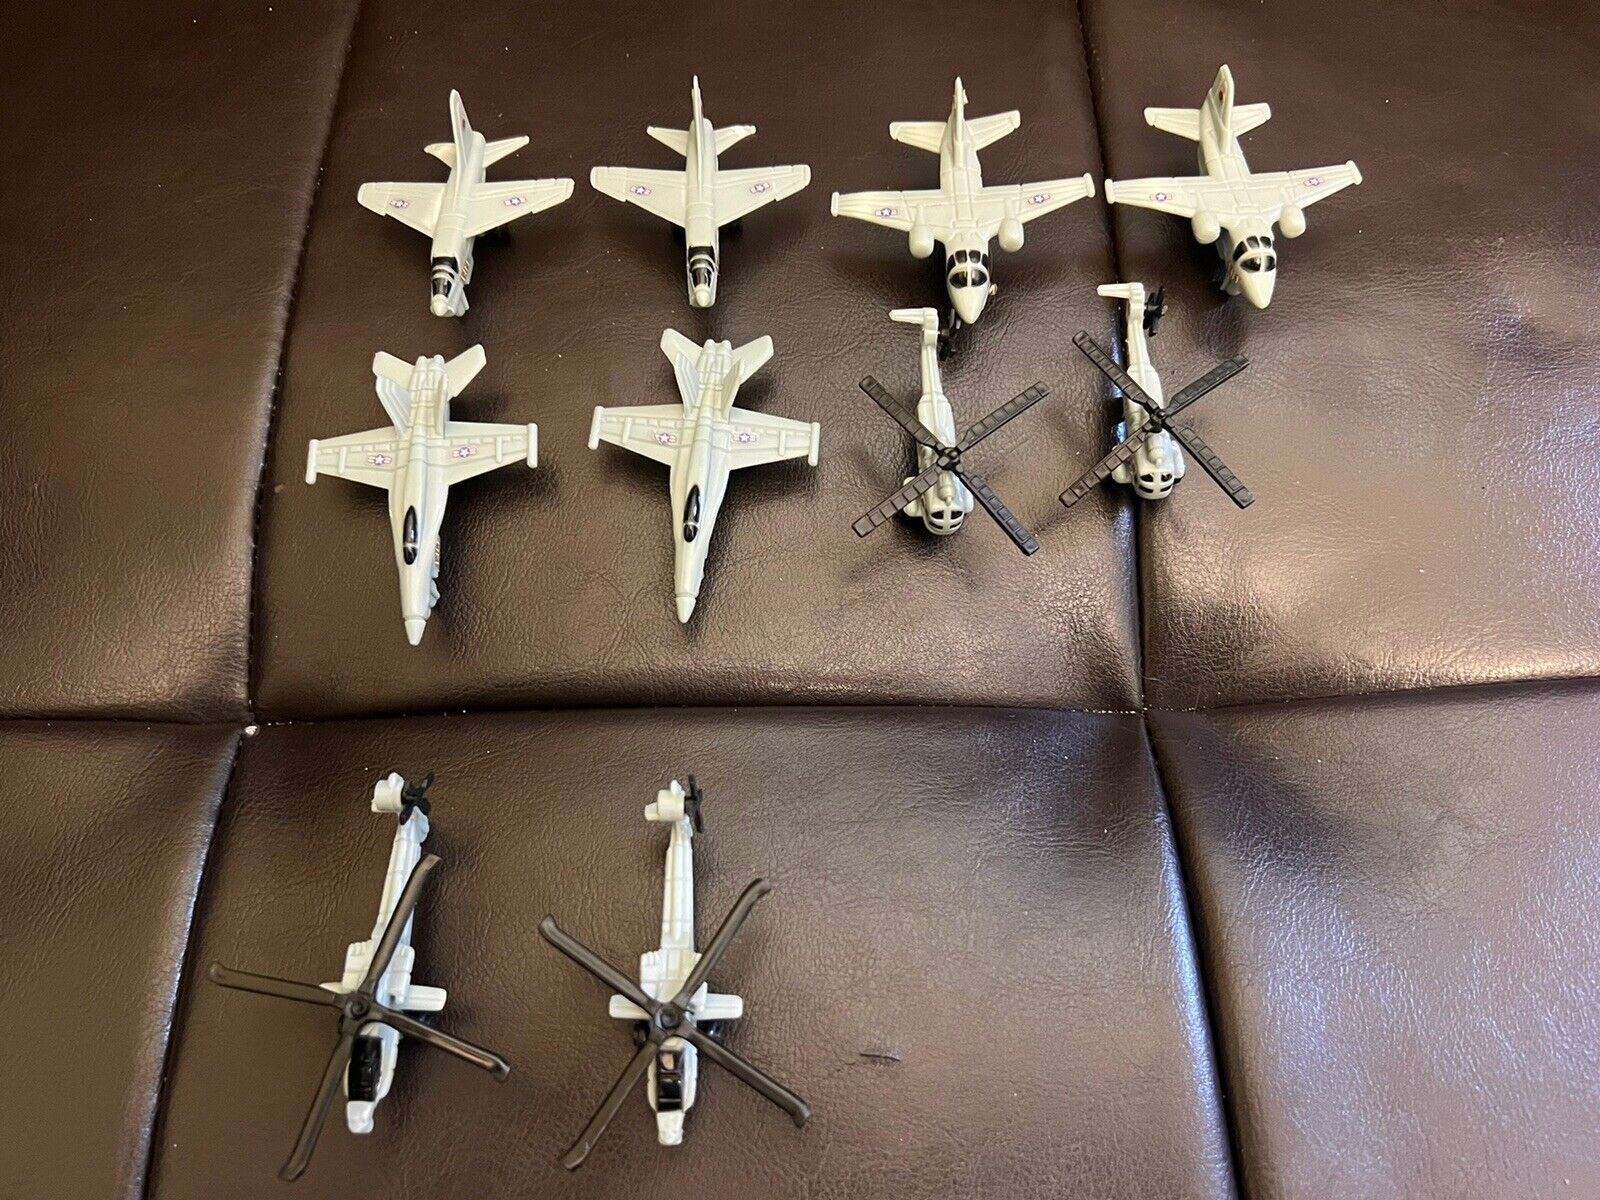 GI Joe USS Saratoga Lot of 10 Aircraft Carrier Planes - JETS HELICOPTERS